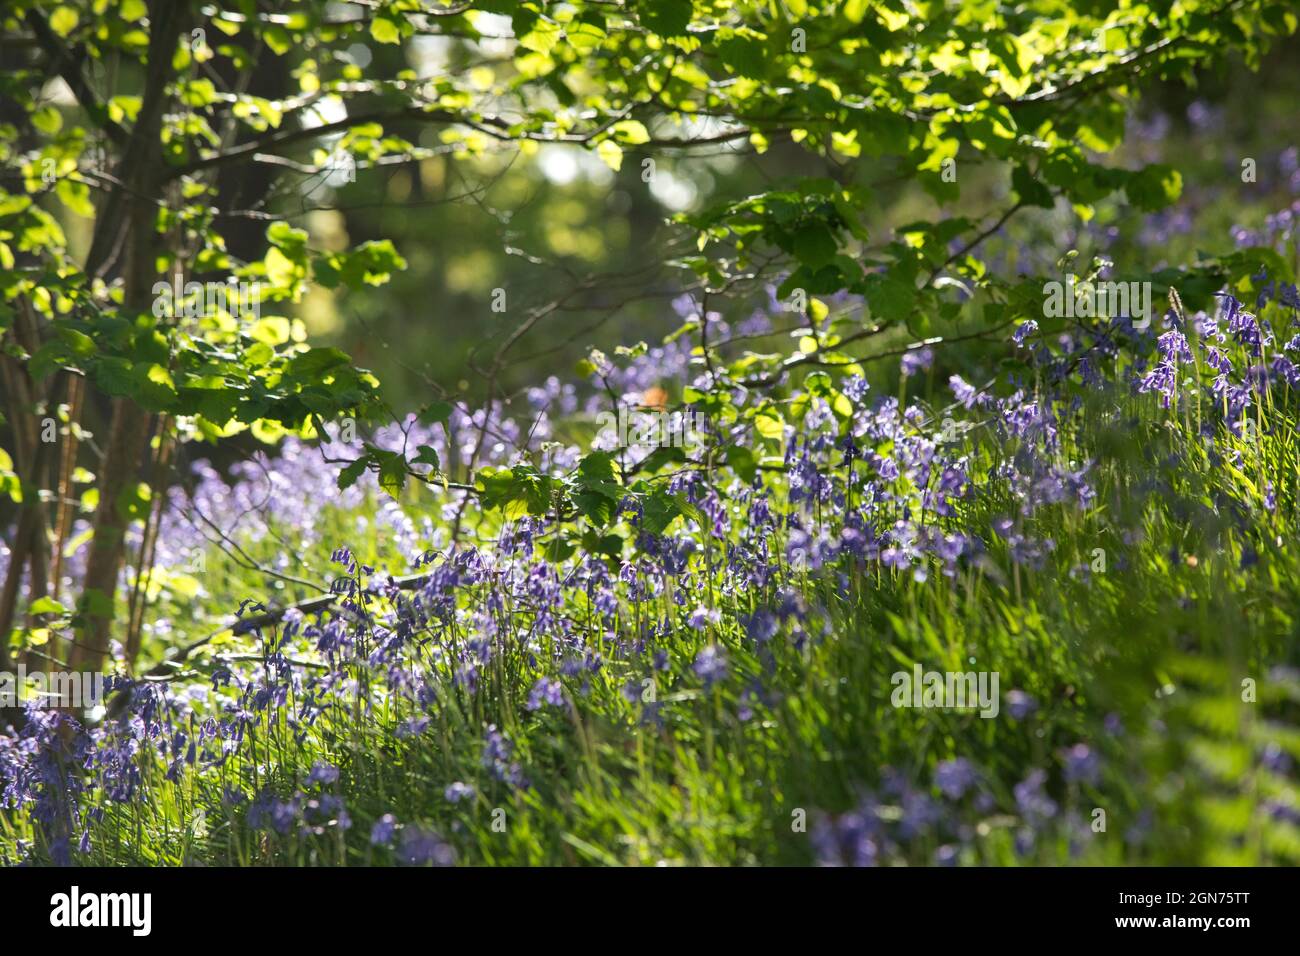 Bluebells (Hyacinthoides non-scripta) flowering in an oak wood. Powys, Wales. May. Stock Photo